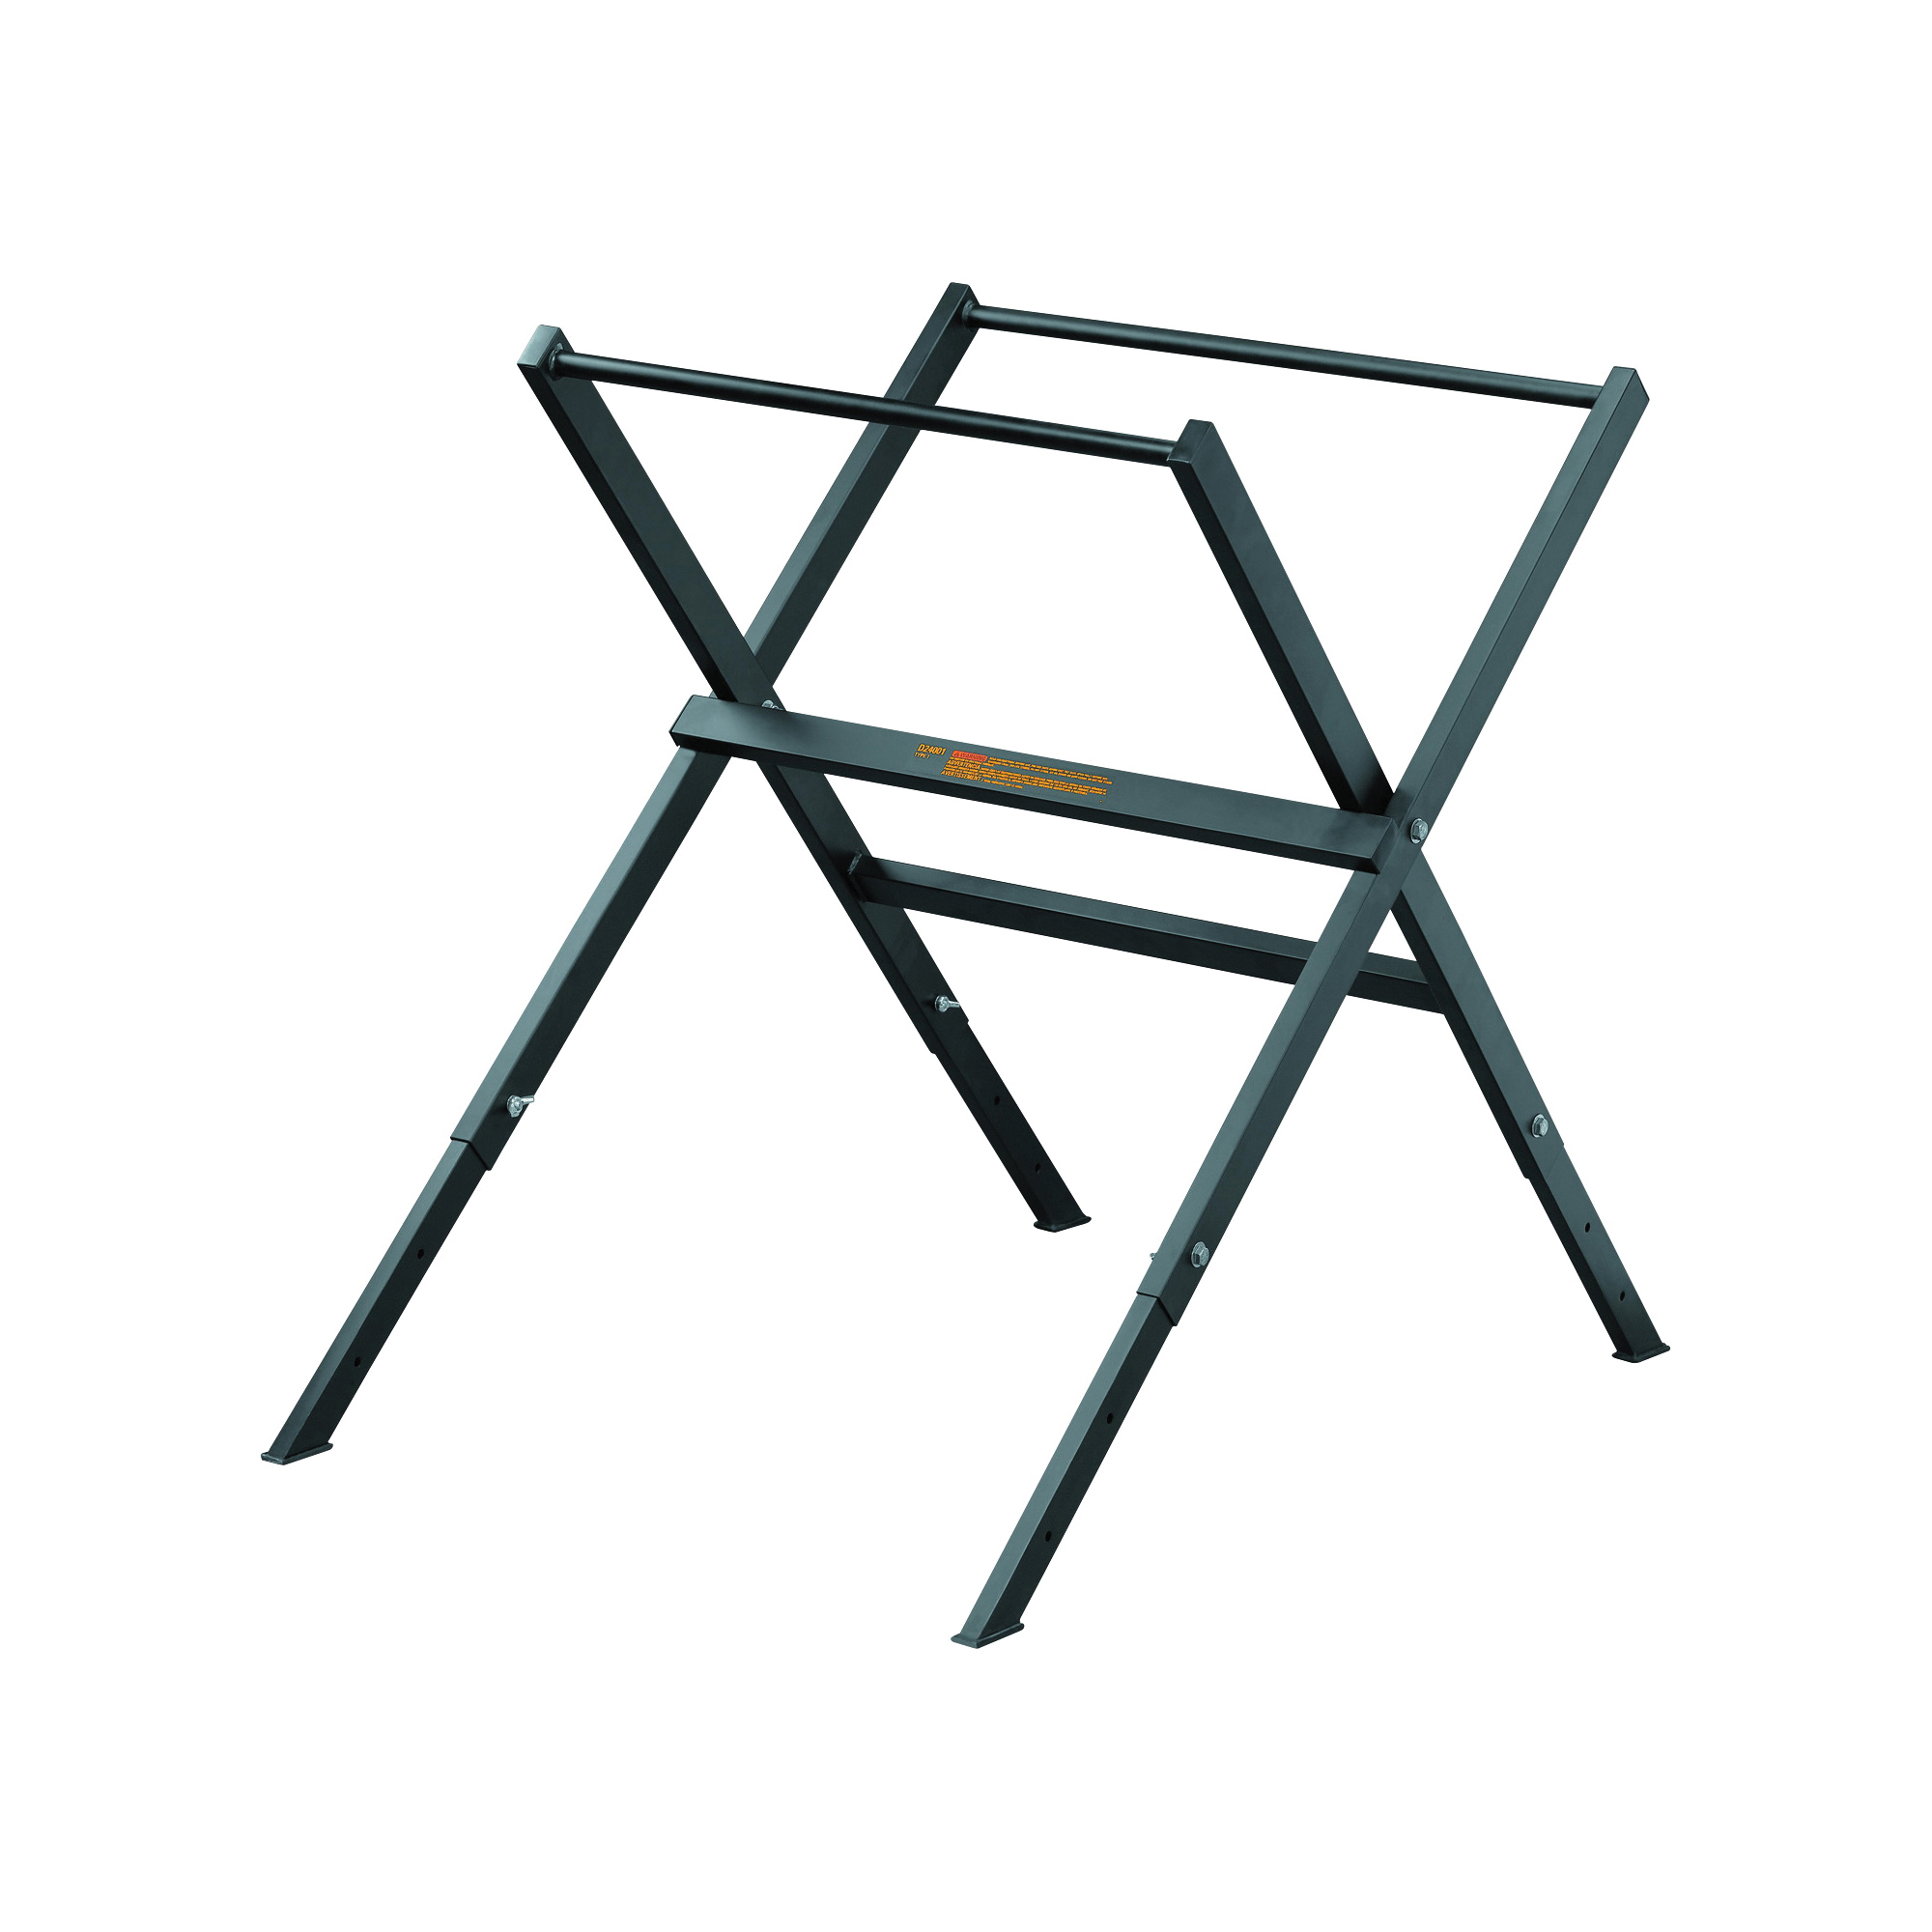 D24001 Folding Stand, 300 lb, 23-3/4 in W Stand, 26-1/4 in D Stand, 29-1/4 in H Stand, Metal, Black